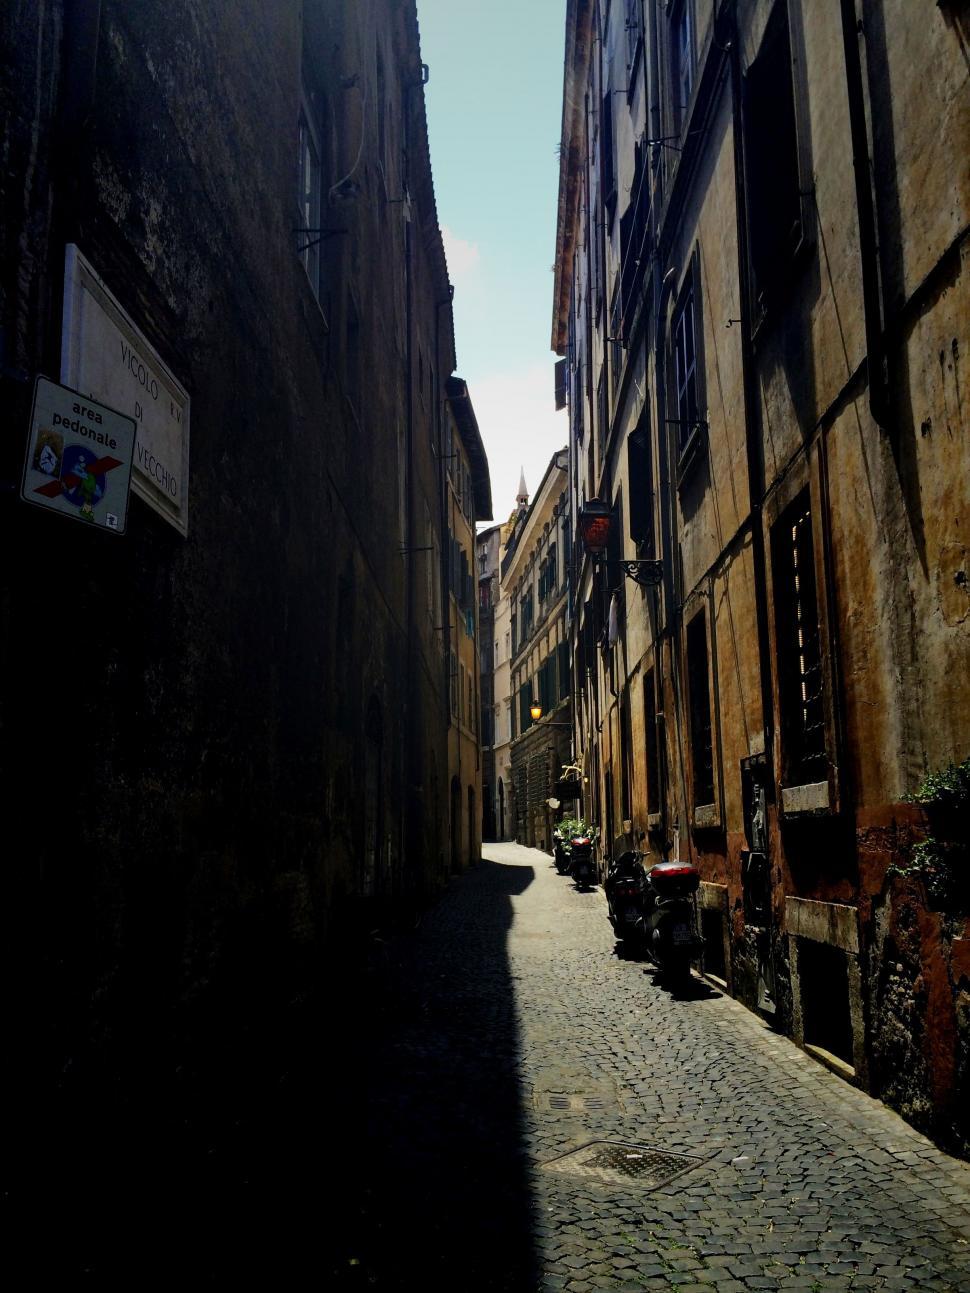 Free Image of Narrow Street With Sign 